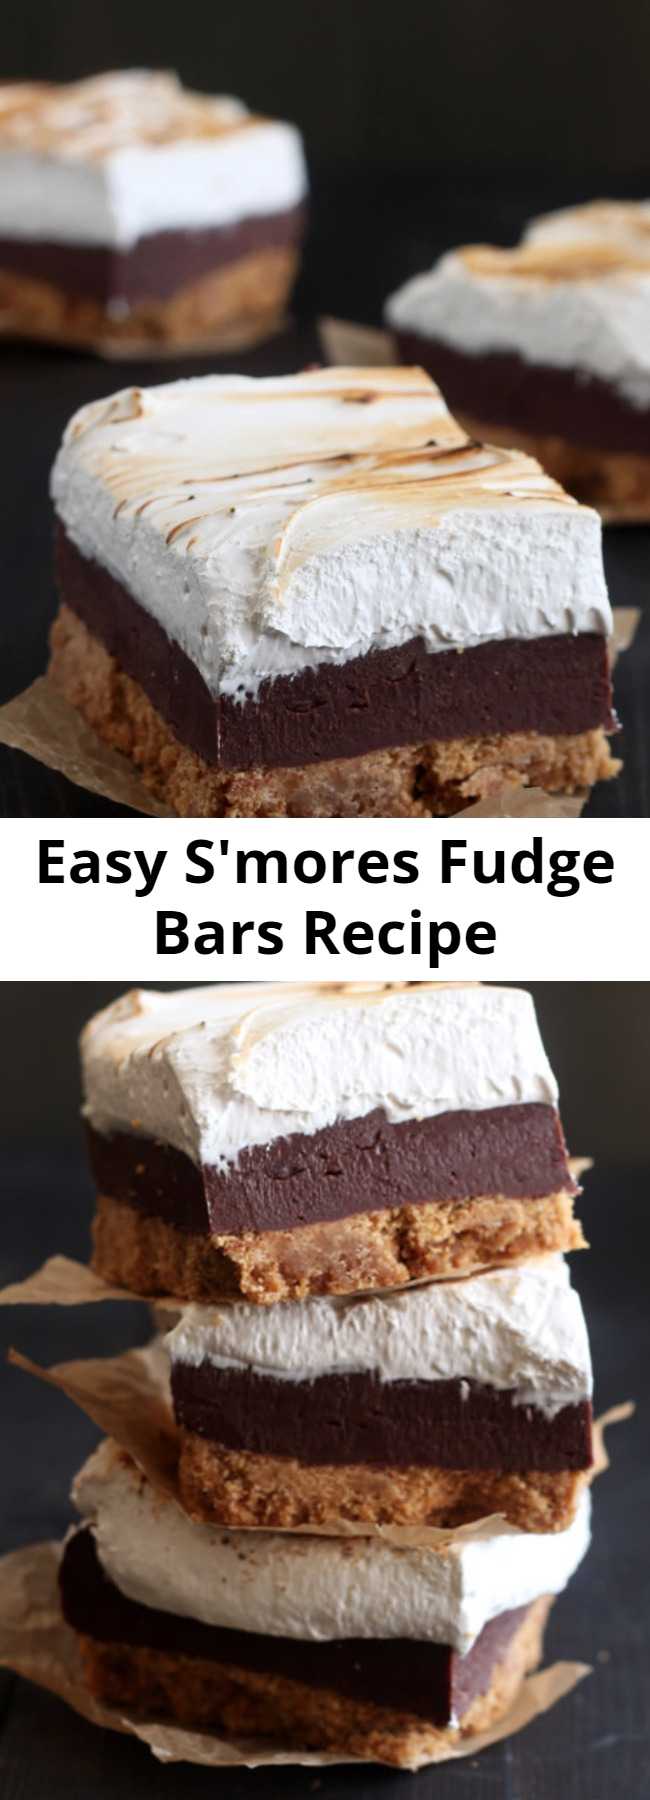 Easy S'mores Fudge Bars Recipe - S'mores Fudge Bars have a thick layer of buttery graham cracker crust, fudgy chocolate filling, and a homemade toasted marshmallow topping. Incredible! Perfect easy summer dessert recipe!